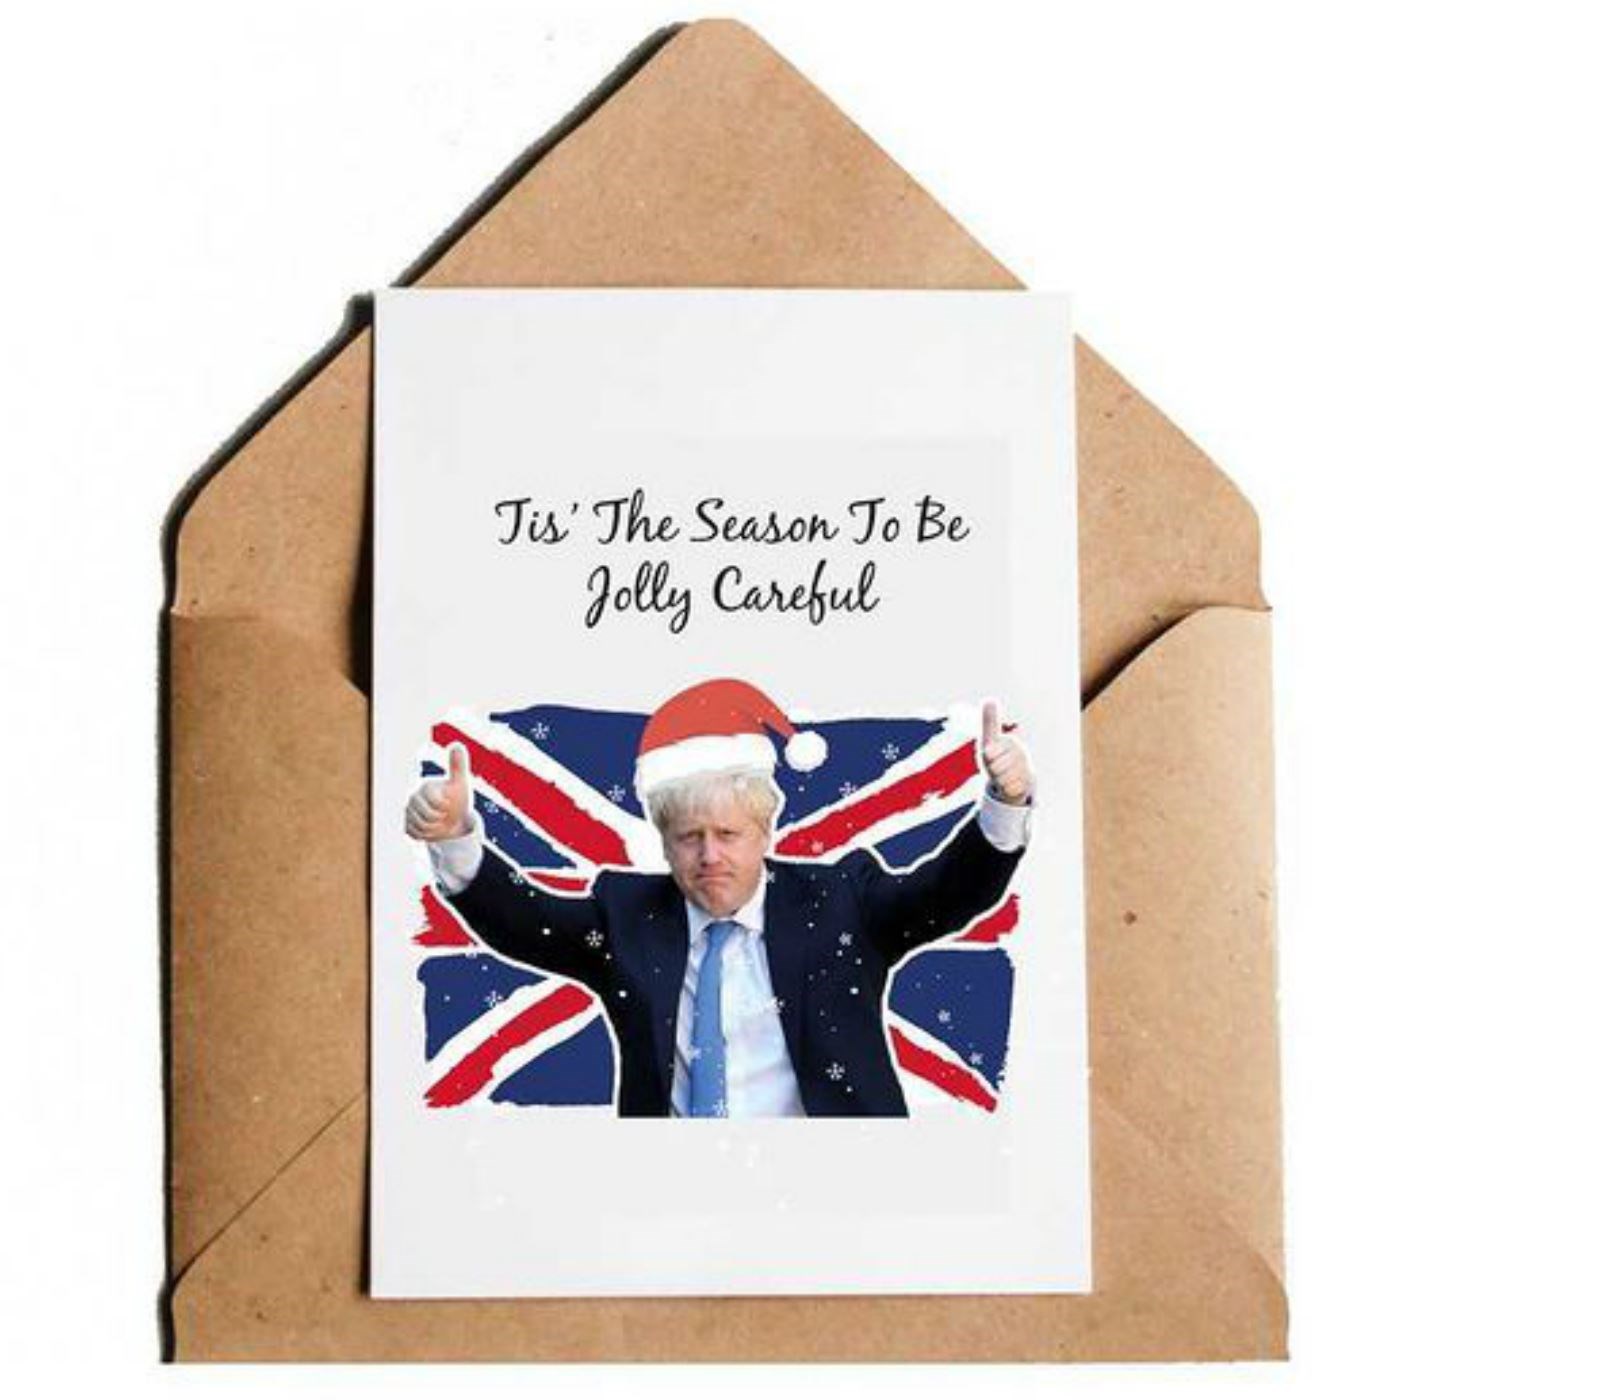 A Christmas card inspired by the Prime Minister’s ‘jolly careful’ speech, created and sold by small business CaliPrintsbyHollie (Hollie Robinson/PA)